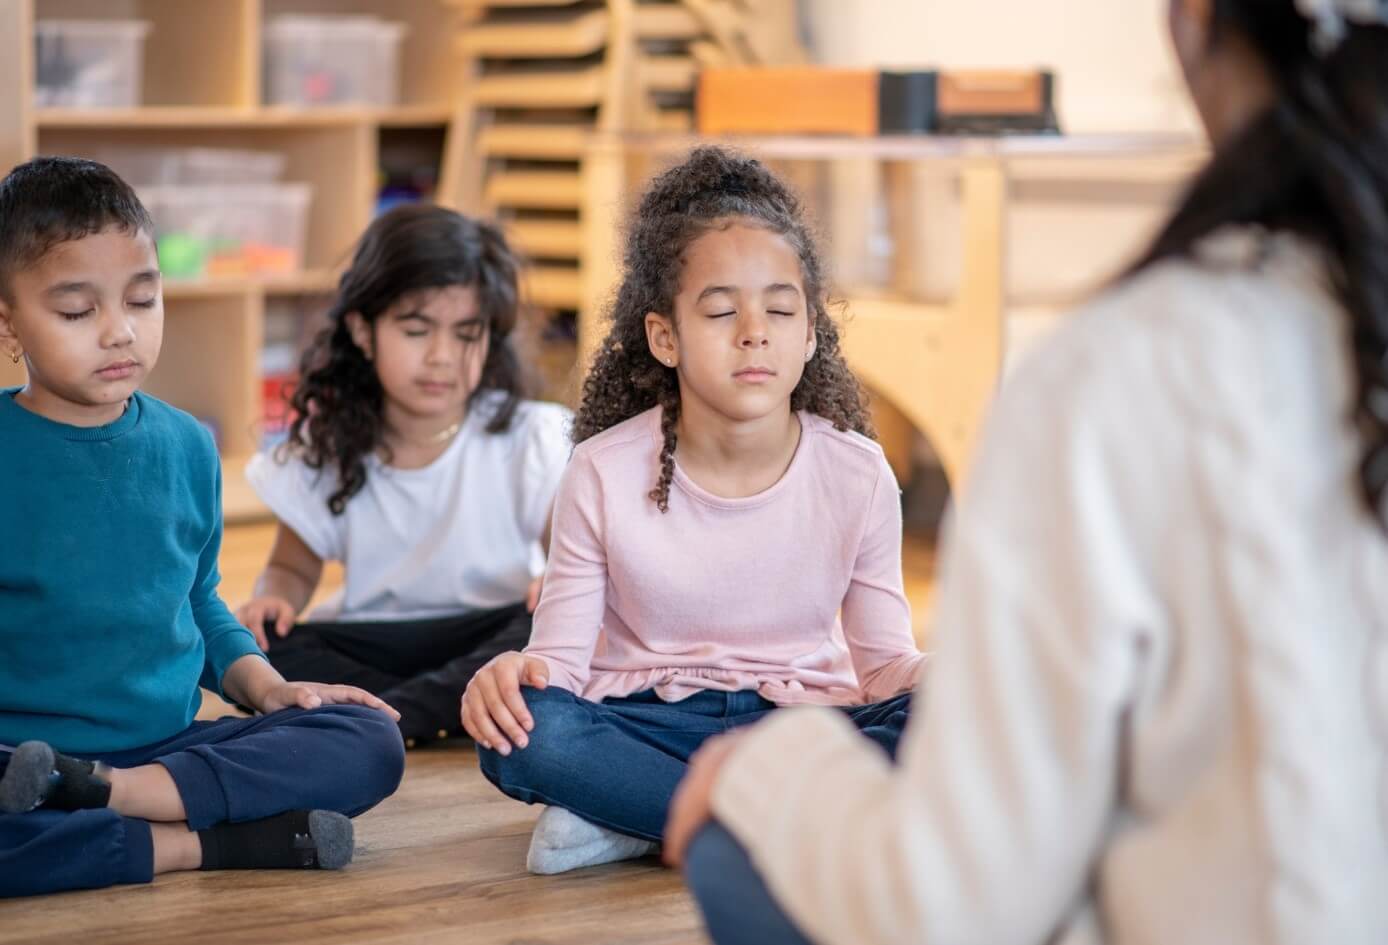 A teacher leads kids in a mindfulness meditation activity on her first day of teaching at a new school.